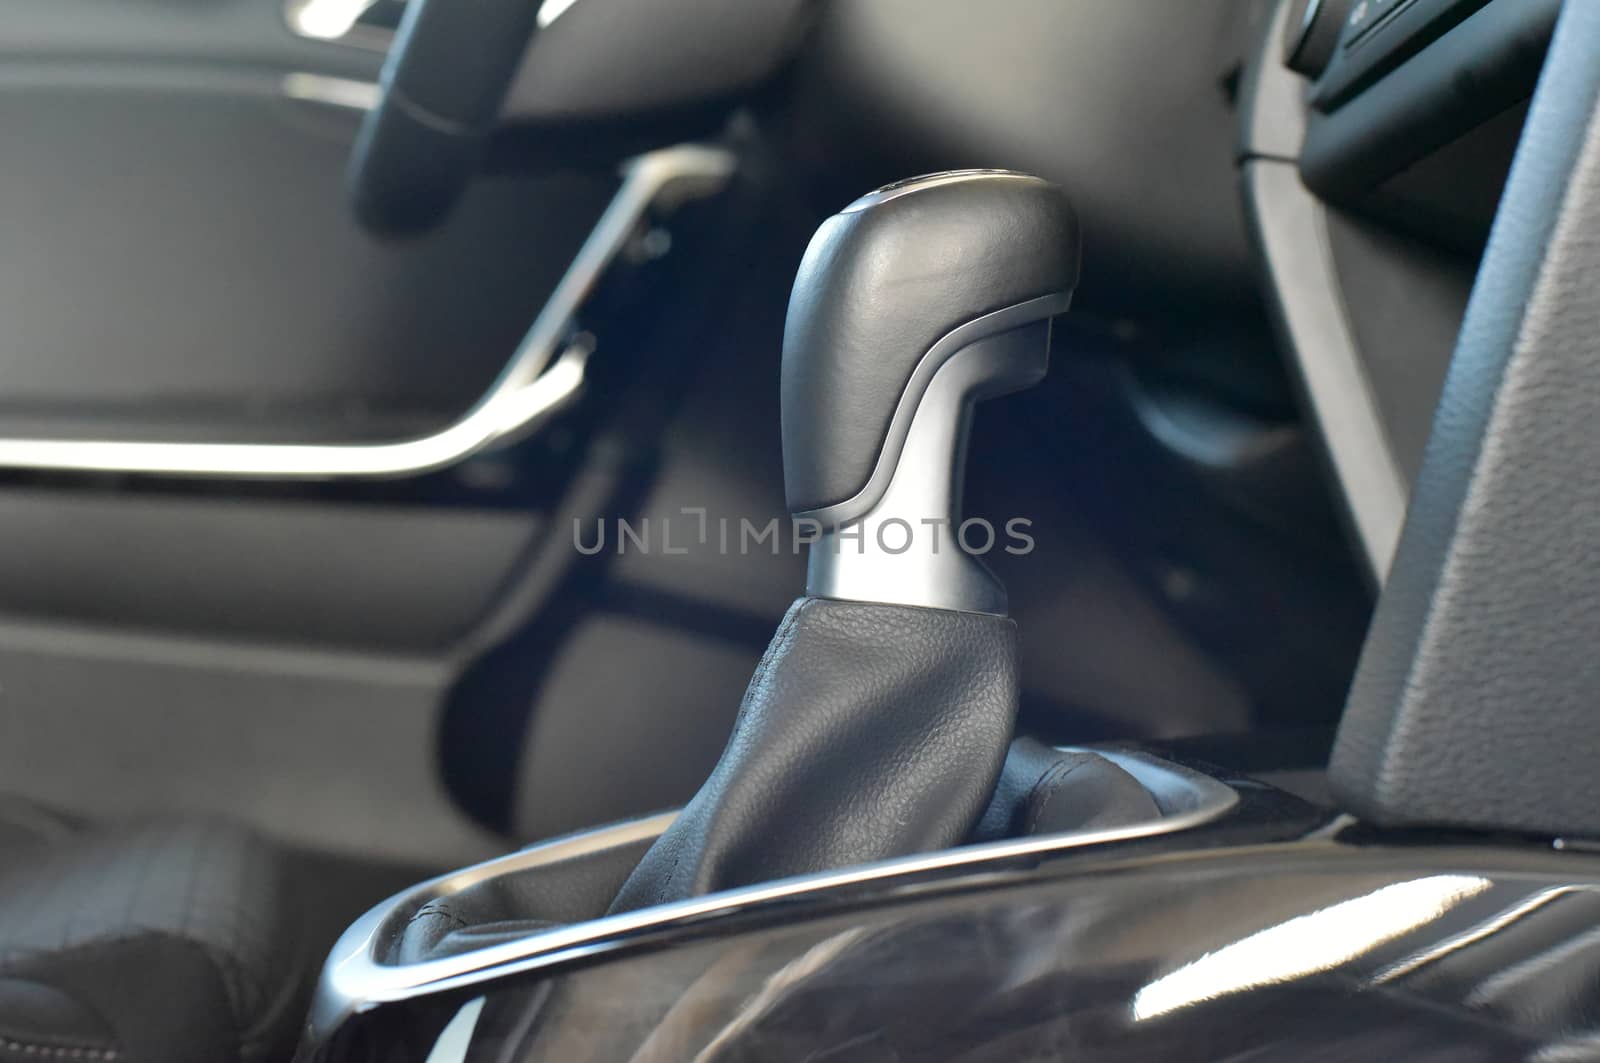 detail in the interior of the modern car, manual shift lever in the passenger car